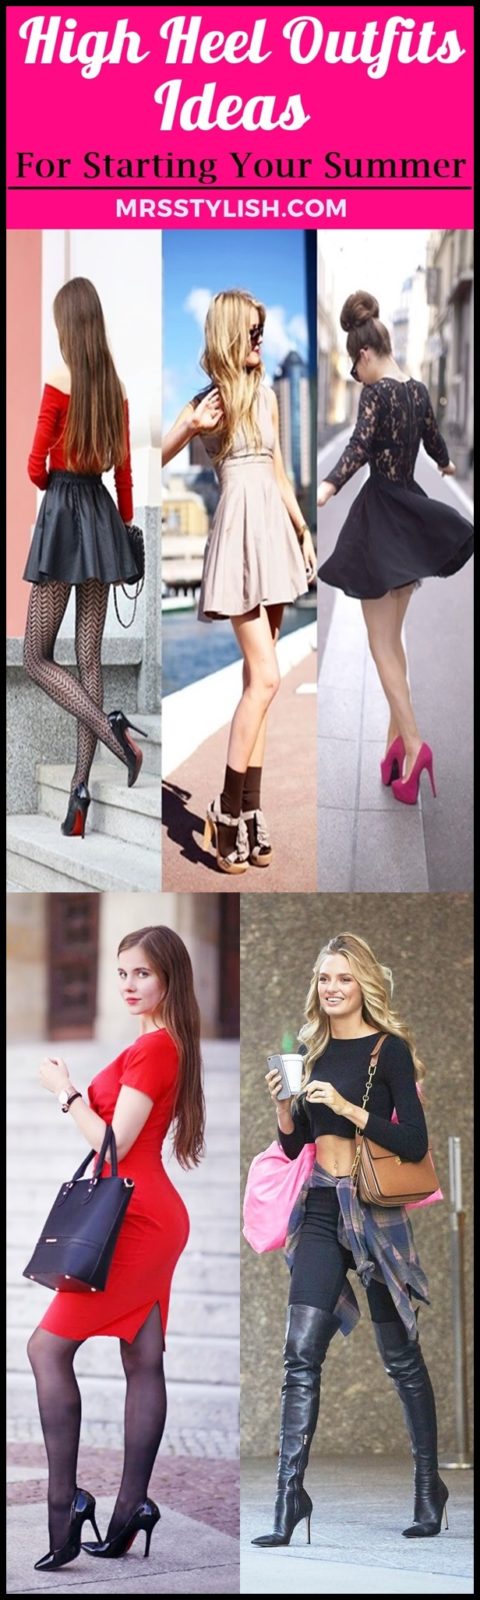 High Heel Outfits Ideas For Starting Your Summer